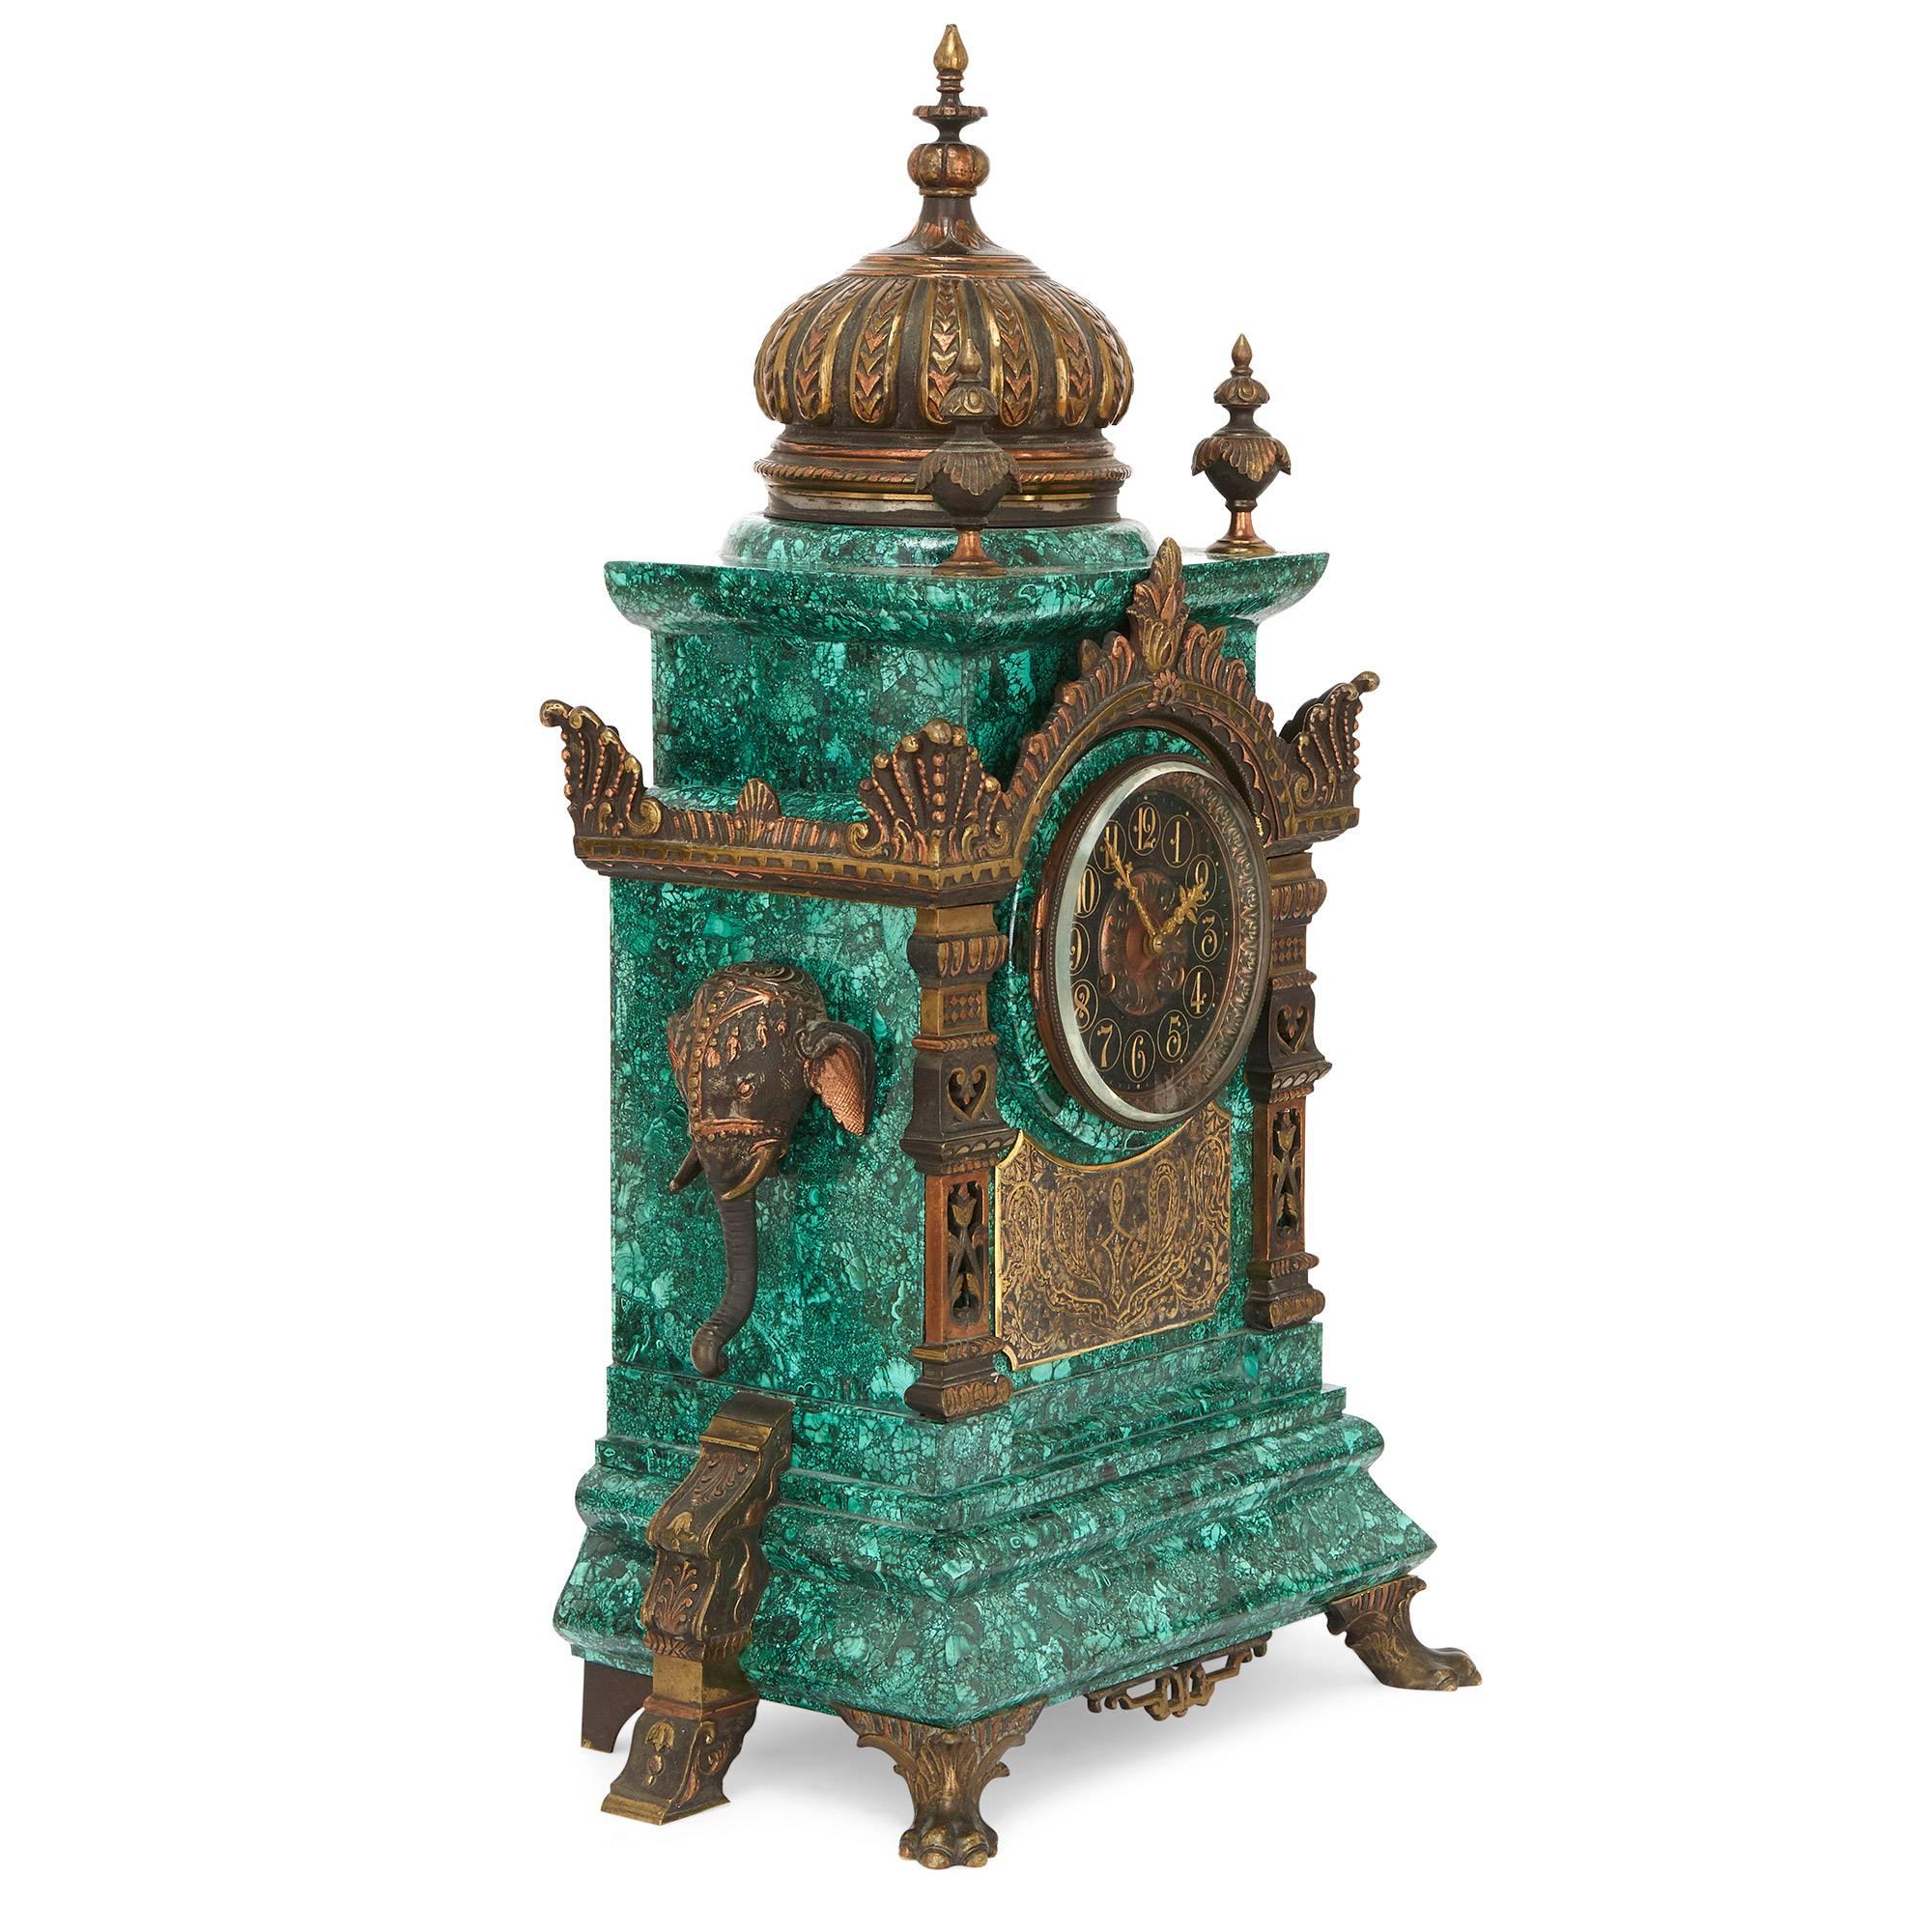 This unusual three-piece clock set is crafted in the Moorish style, which was revived in the 19th century as part of a larger movement and general interest in Asia and the Far East. The clock case features a central dial with gold incised Arabic